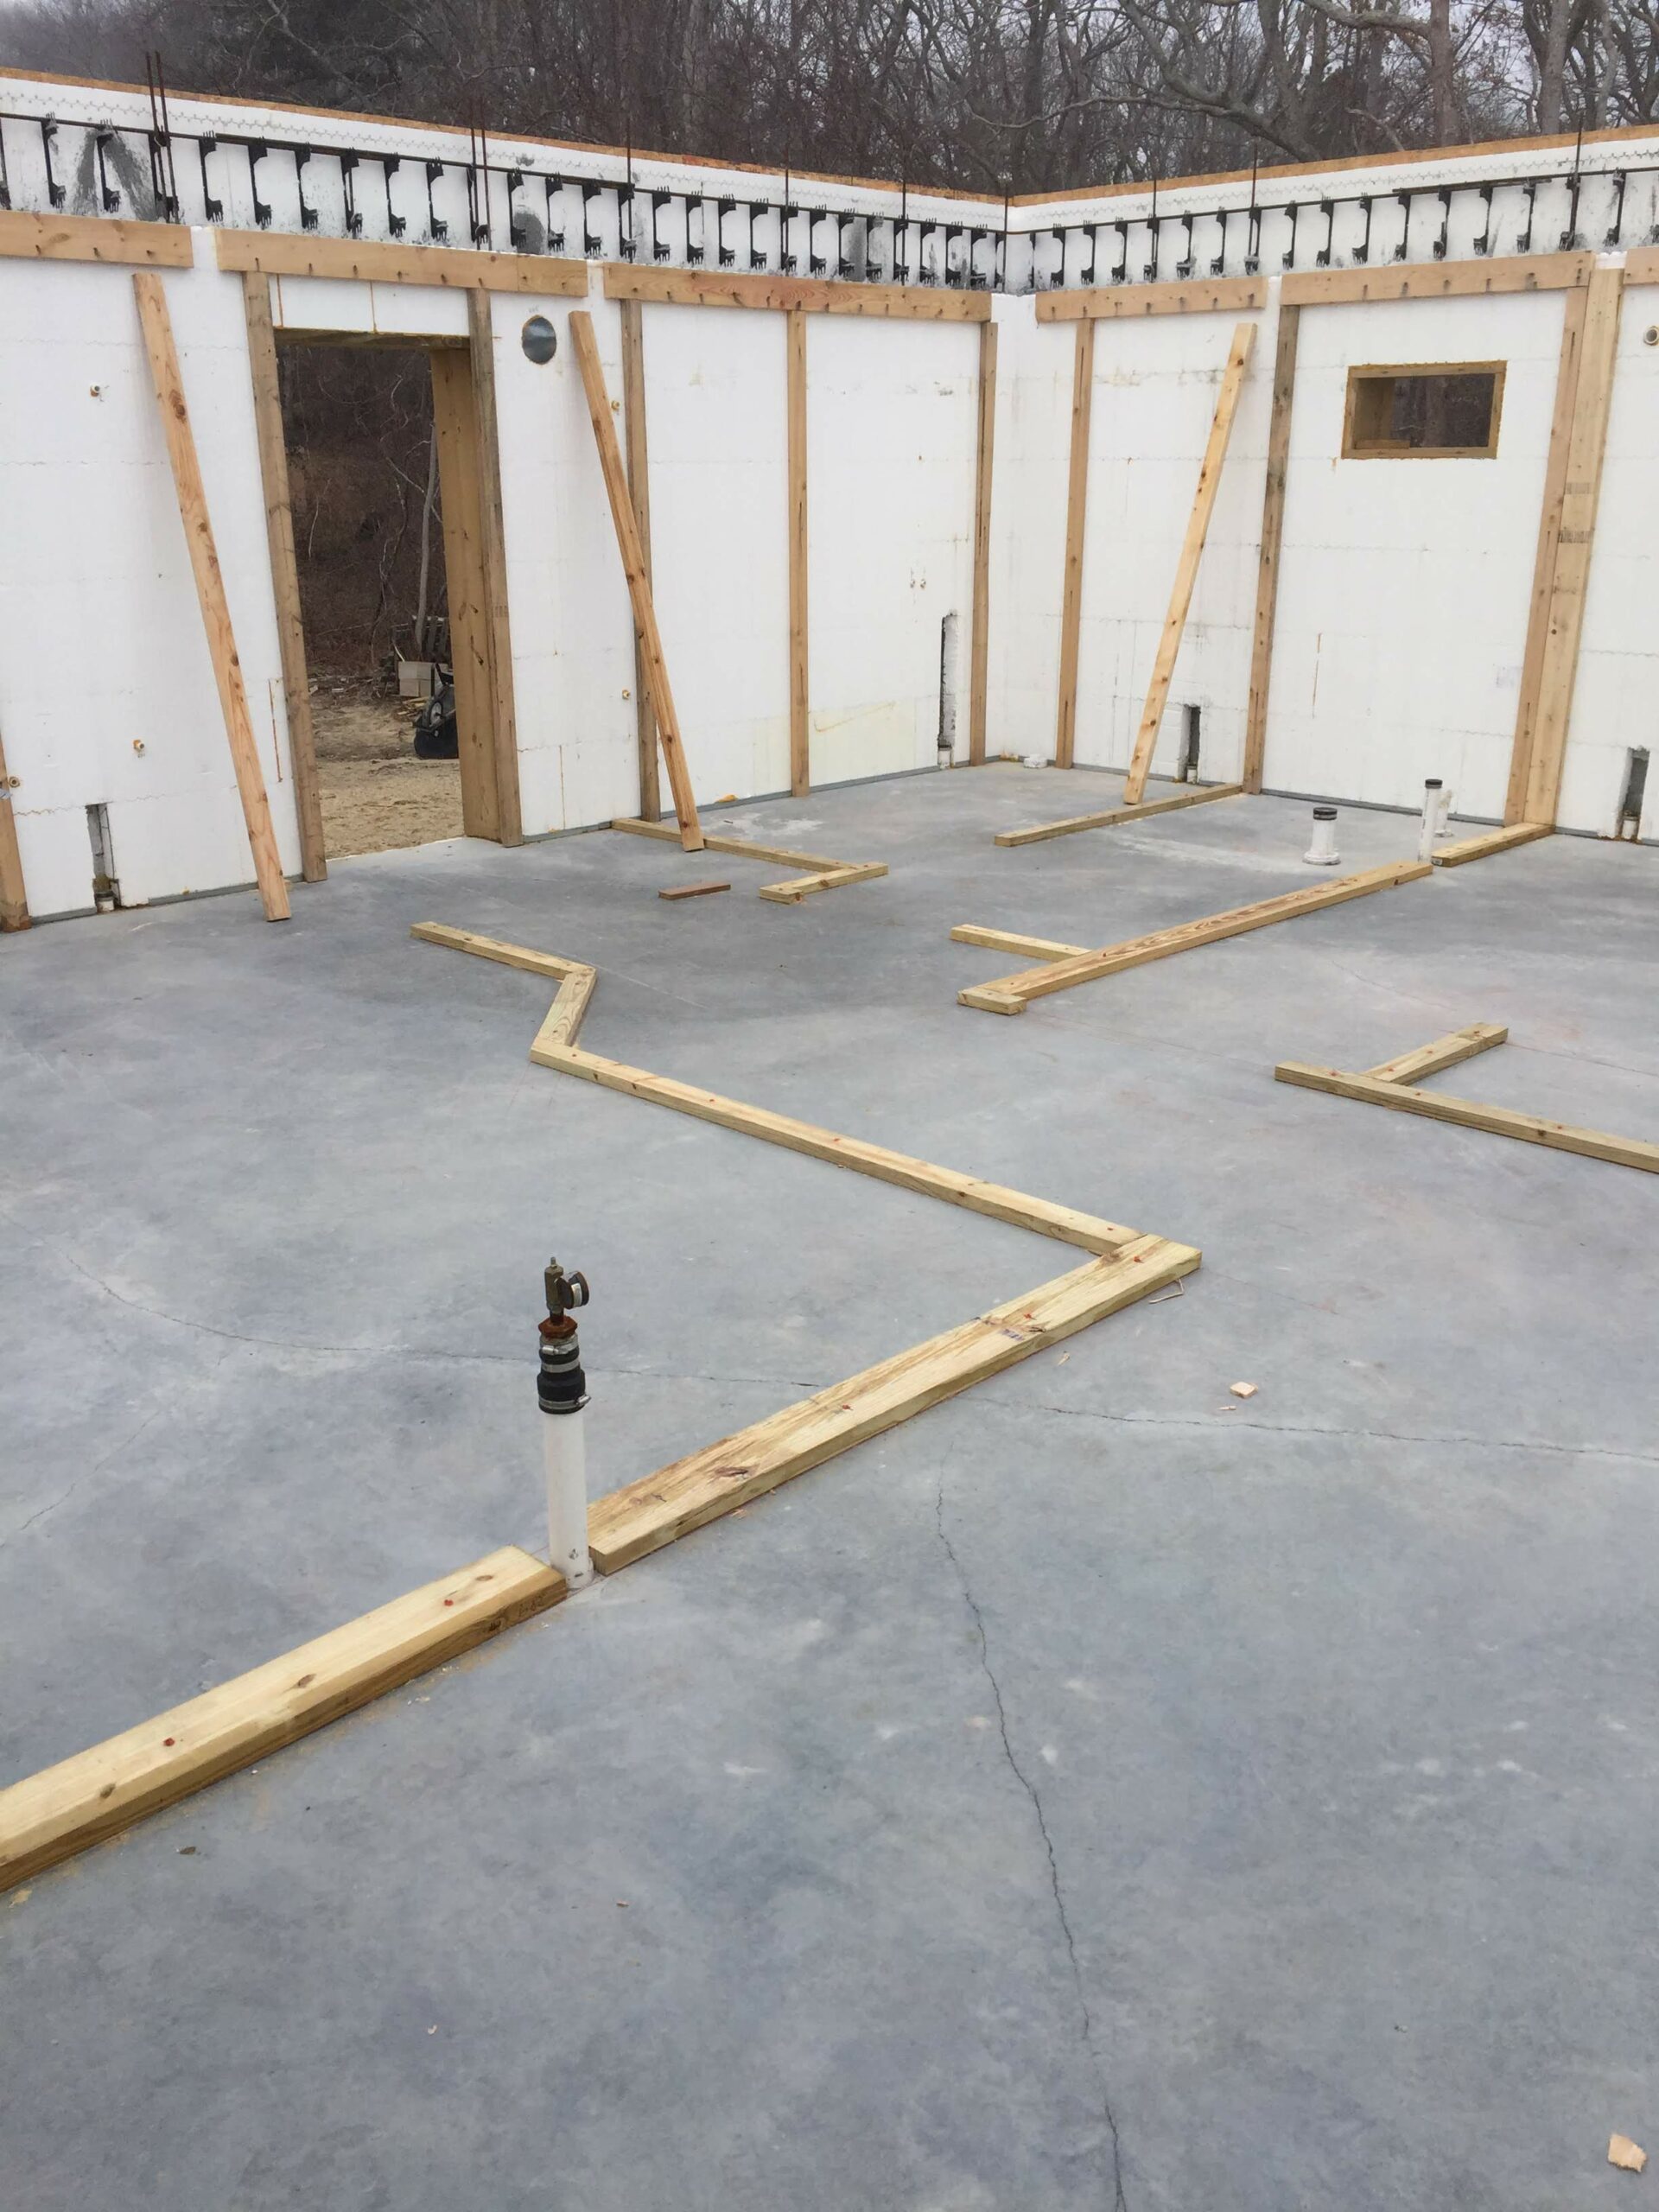 the base layer of wooden framing inside an ICF home is set ready for the interior wall framing to be built in this ICF home.